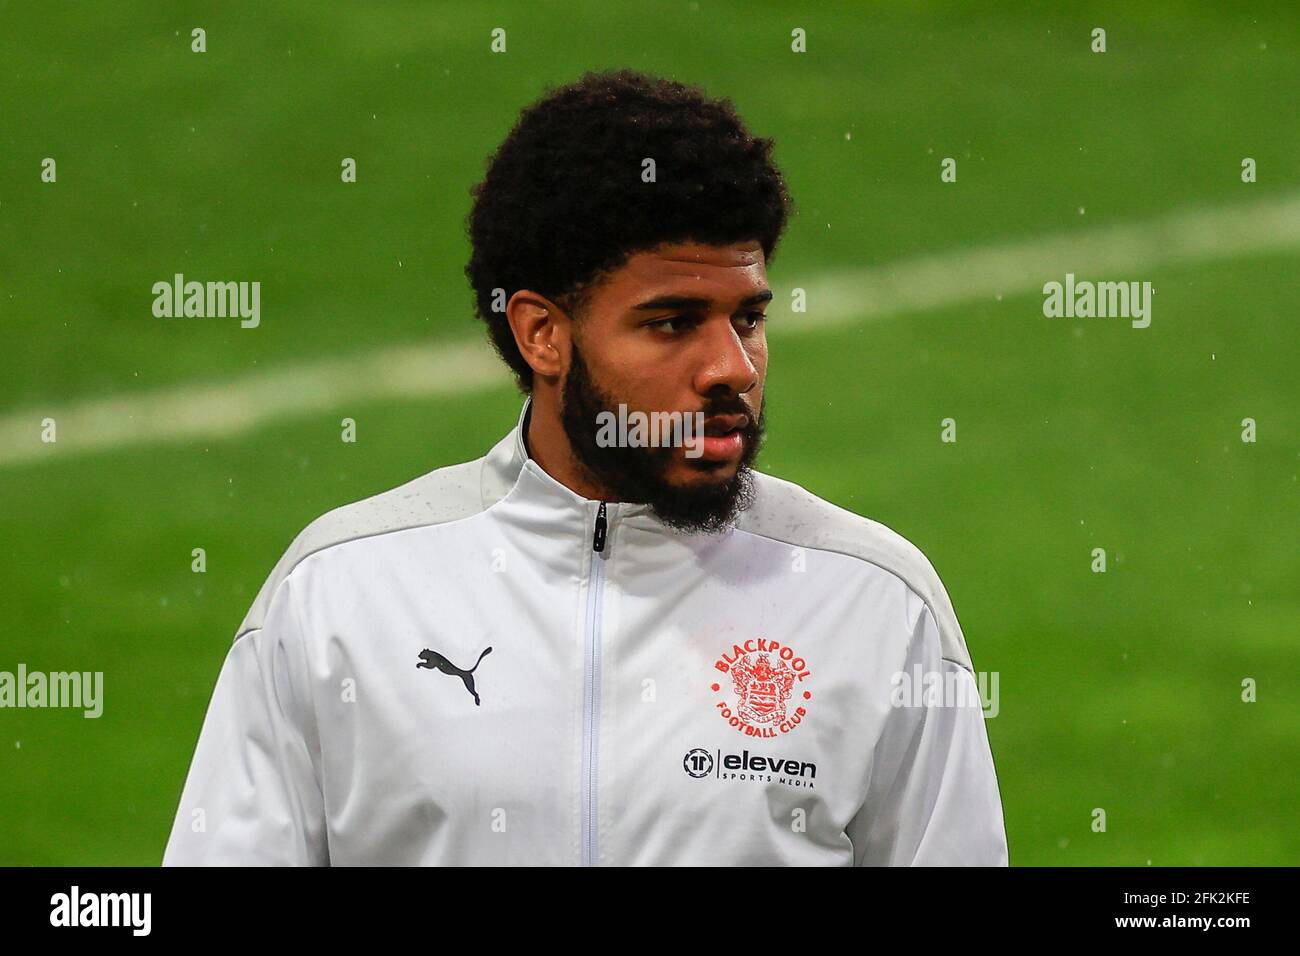 Sunderland, UK. 27th Apr, 2021. Ellis Simms #19 of Blackpool during the pre-game warmup in Sunderland, United Kingdom on 4/27/2021. (Photo by Iam Burn/News Images/Sipa USA) Credit: Sipa USA/Alamy Live News Stock Photo